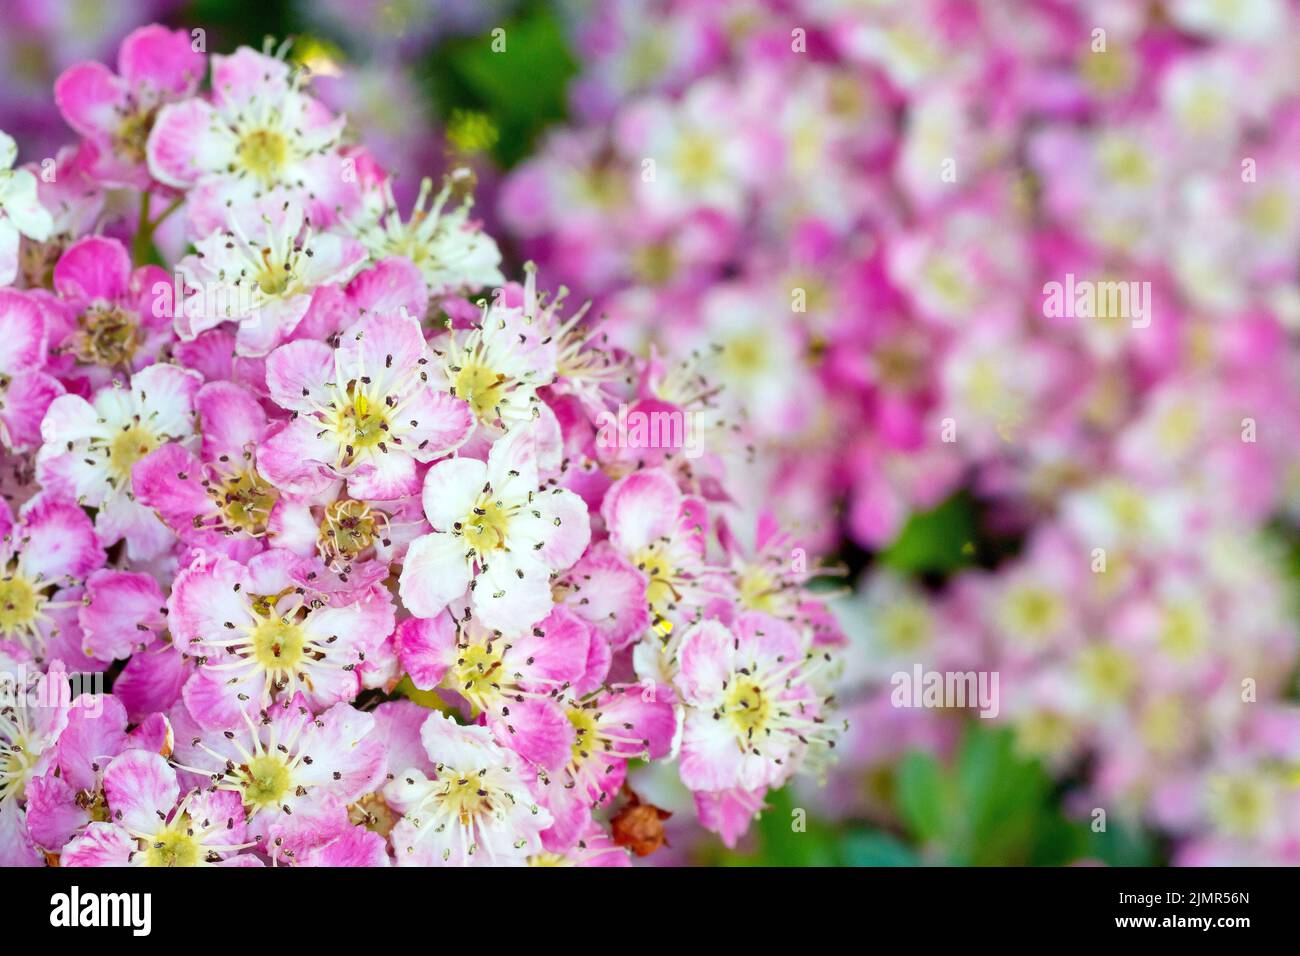 Hawthorn, Whitethorn or May Tree (crataegus monogyna), close up showing some strongly pink tinged flowers or blossom of the common tree. Stock Photo